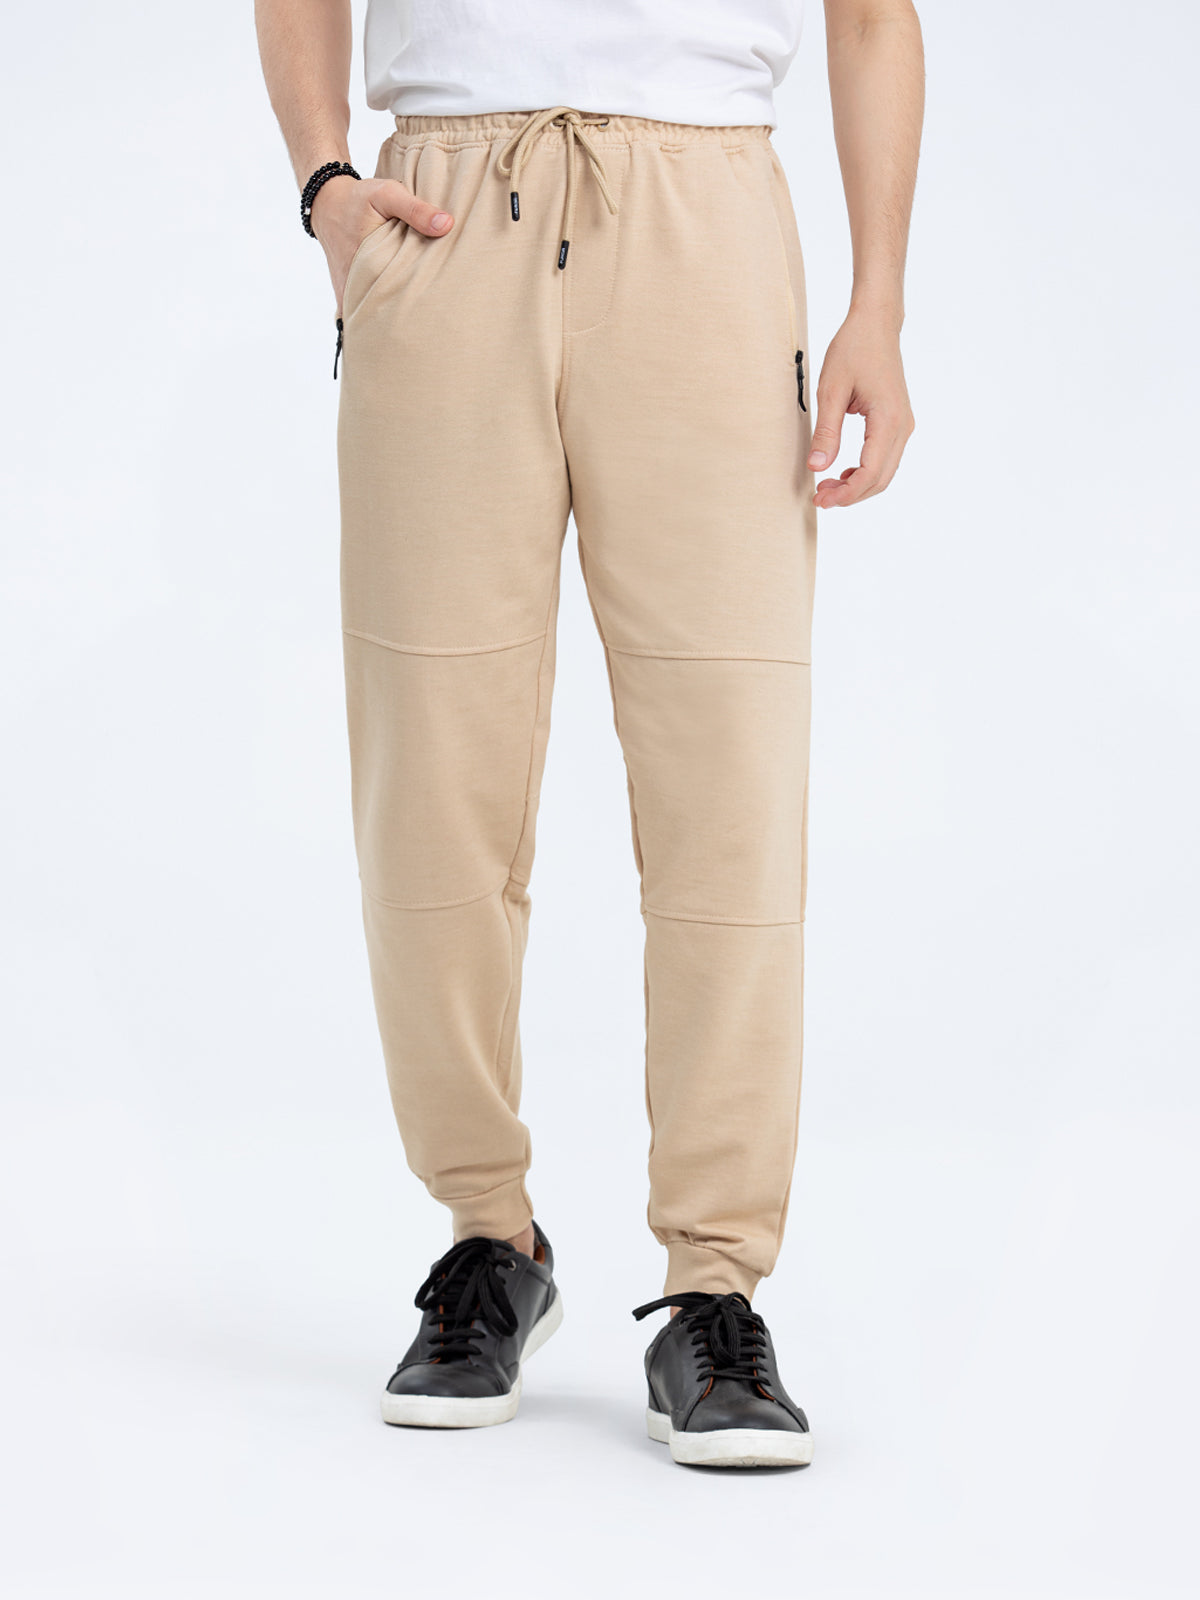 French Terry Jog Pant - FMBT24-002